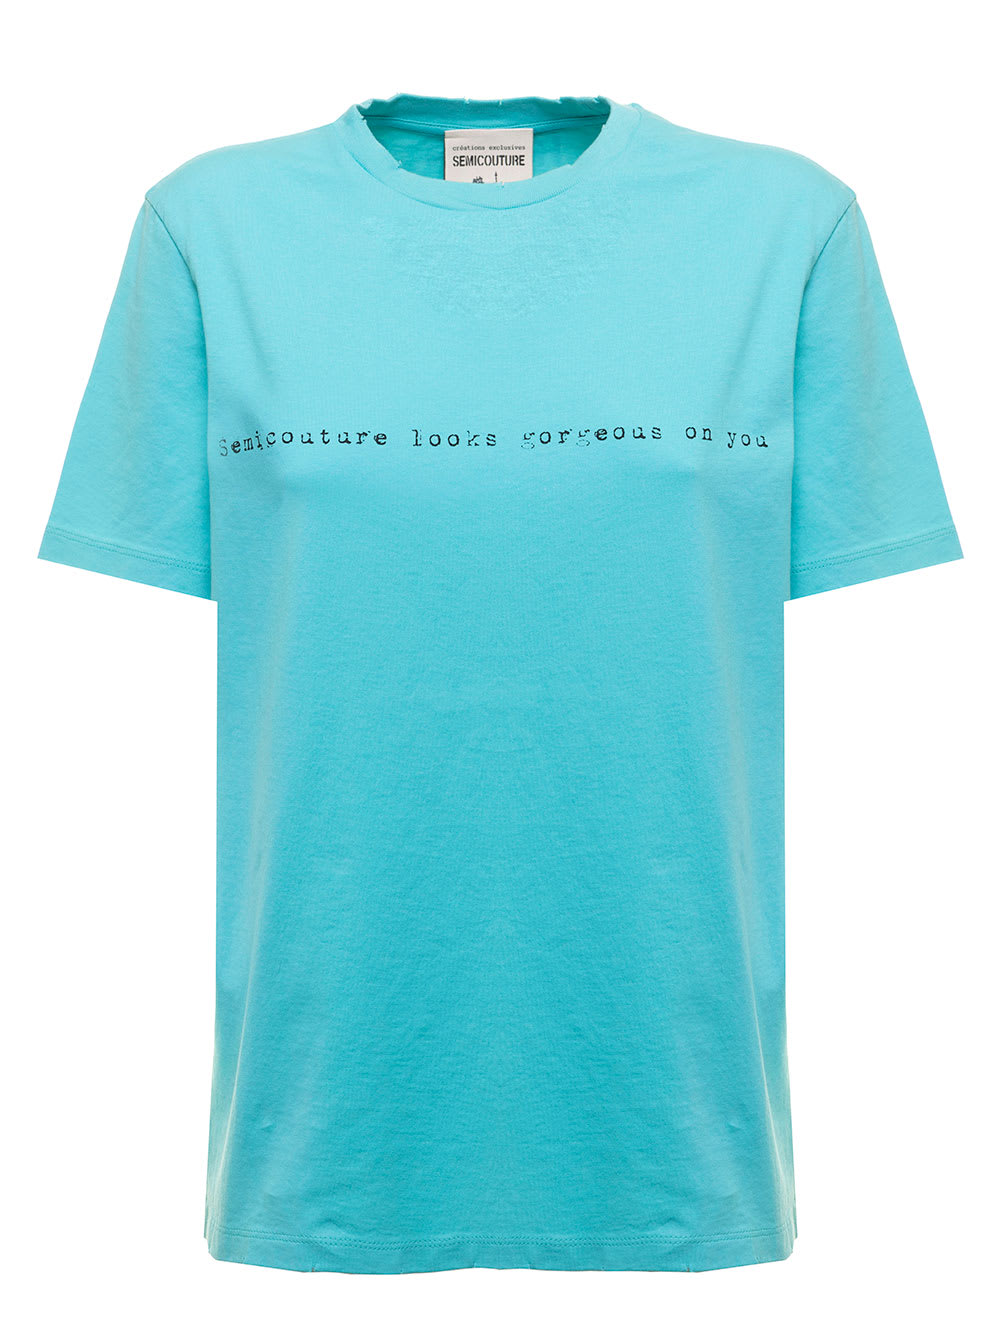 Semicouture Womans Light Blue Cotton T-shirt With Front Print